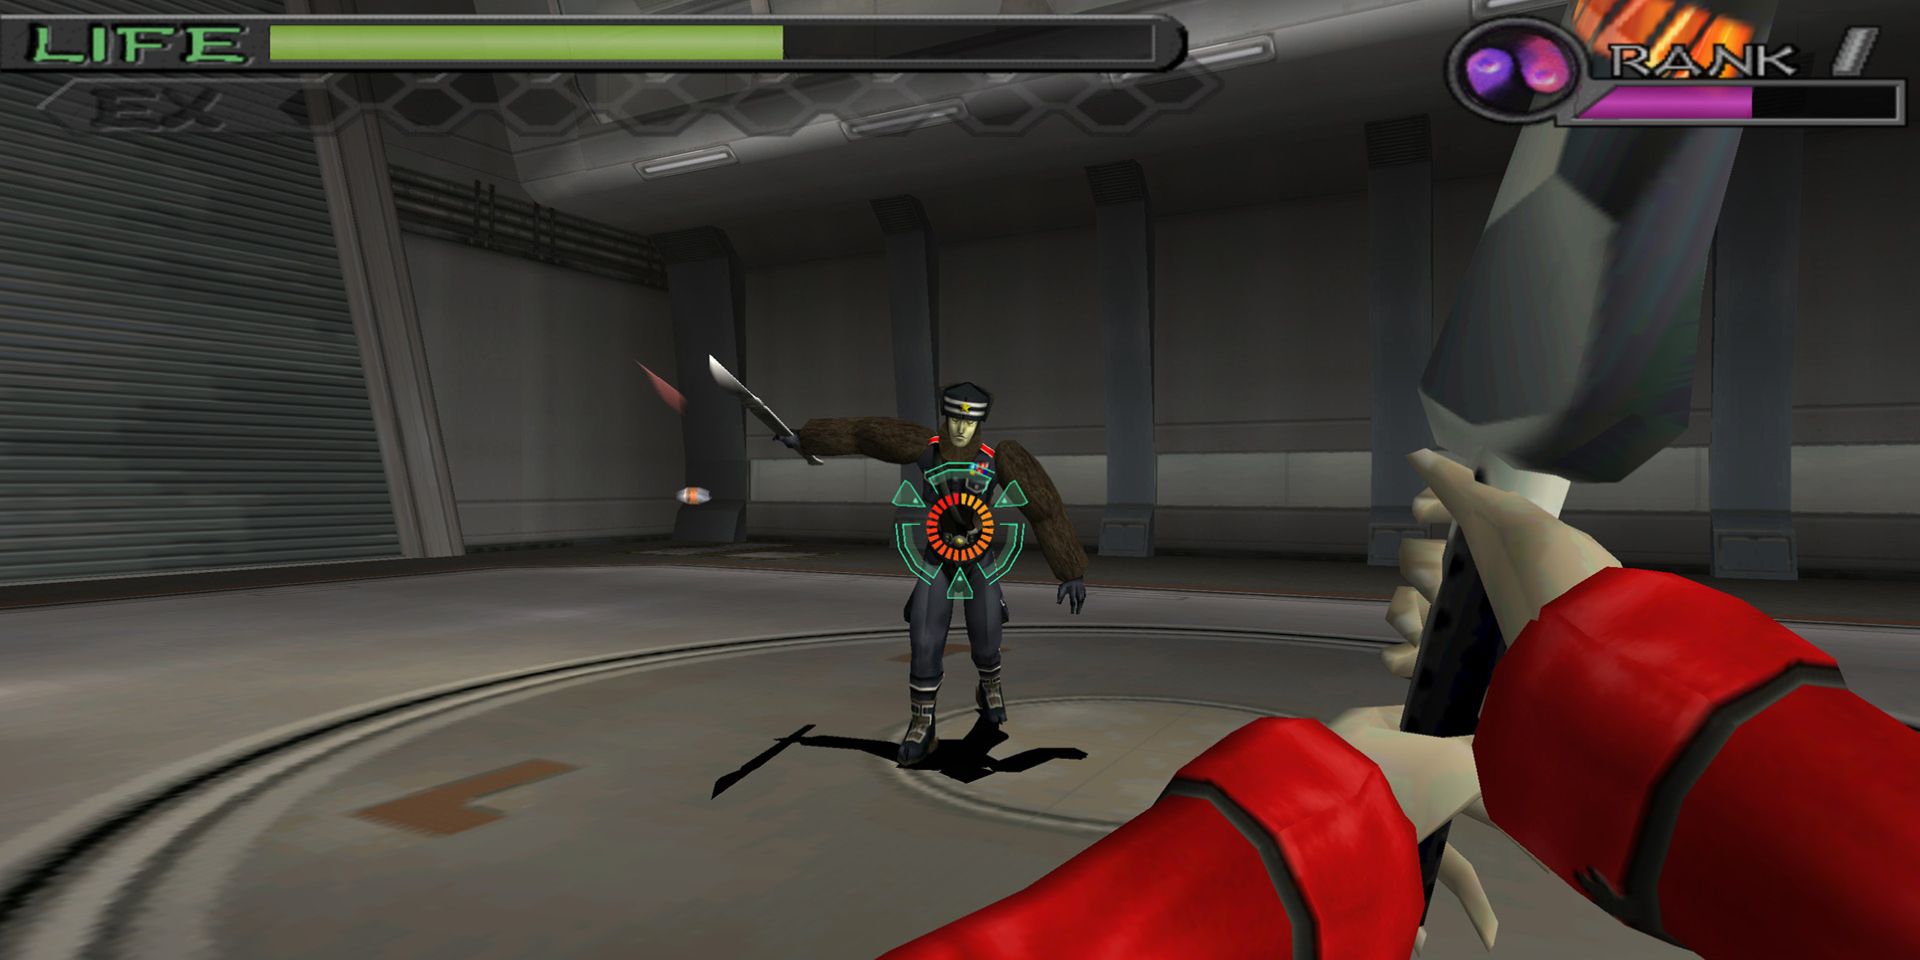 A player wields a weapon against an opponent in Maken X.